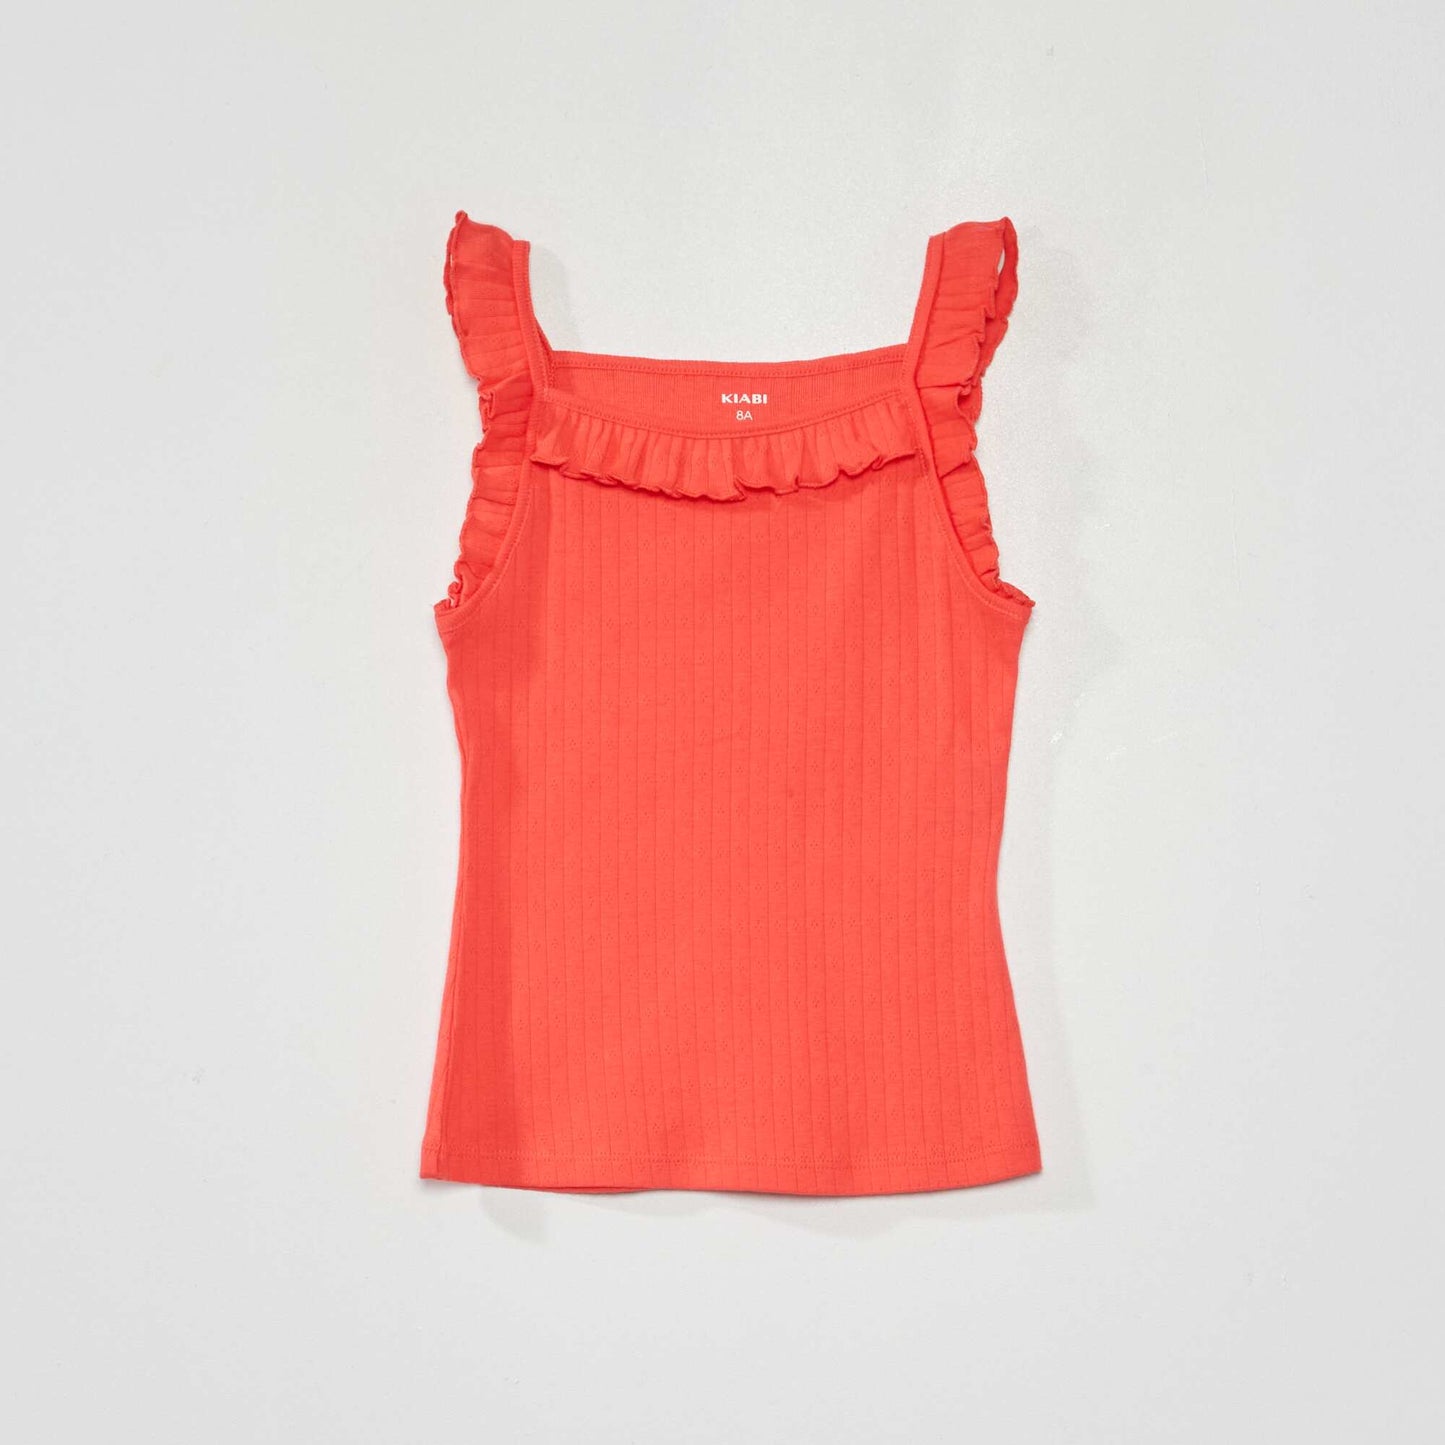 Pointelle vest top with ruffles cayenne red